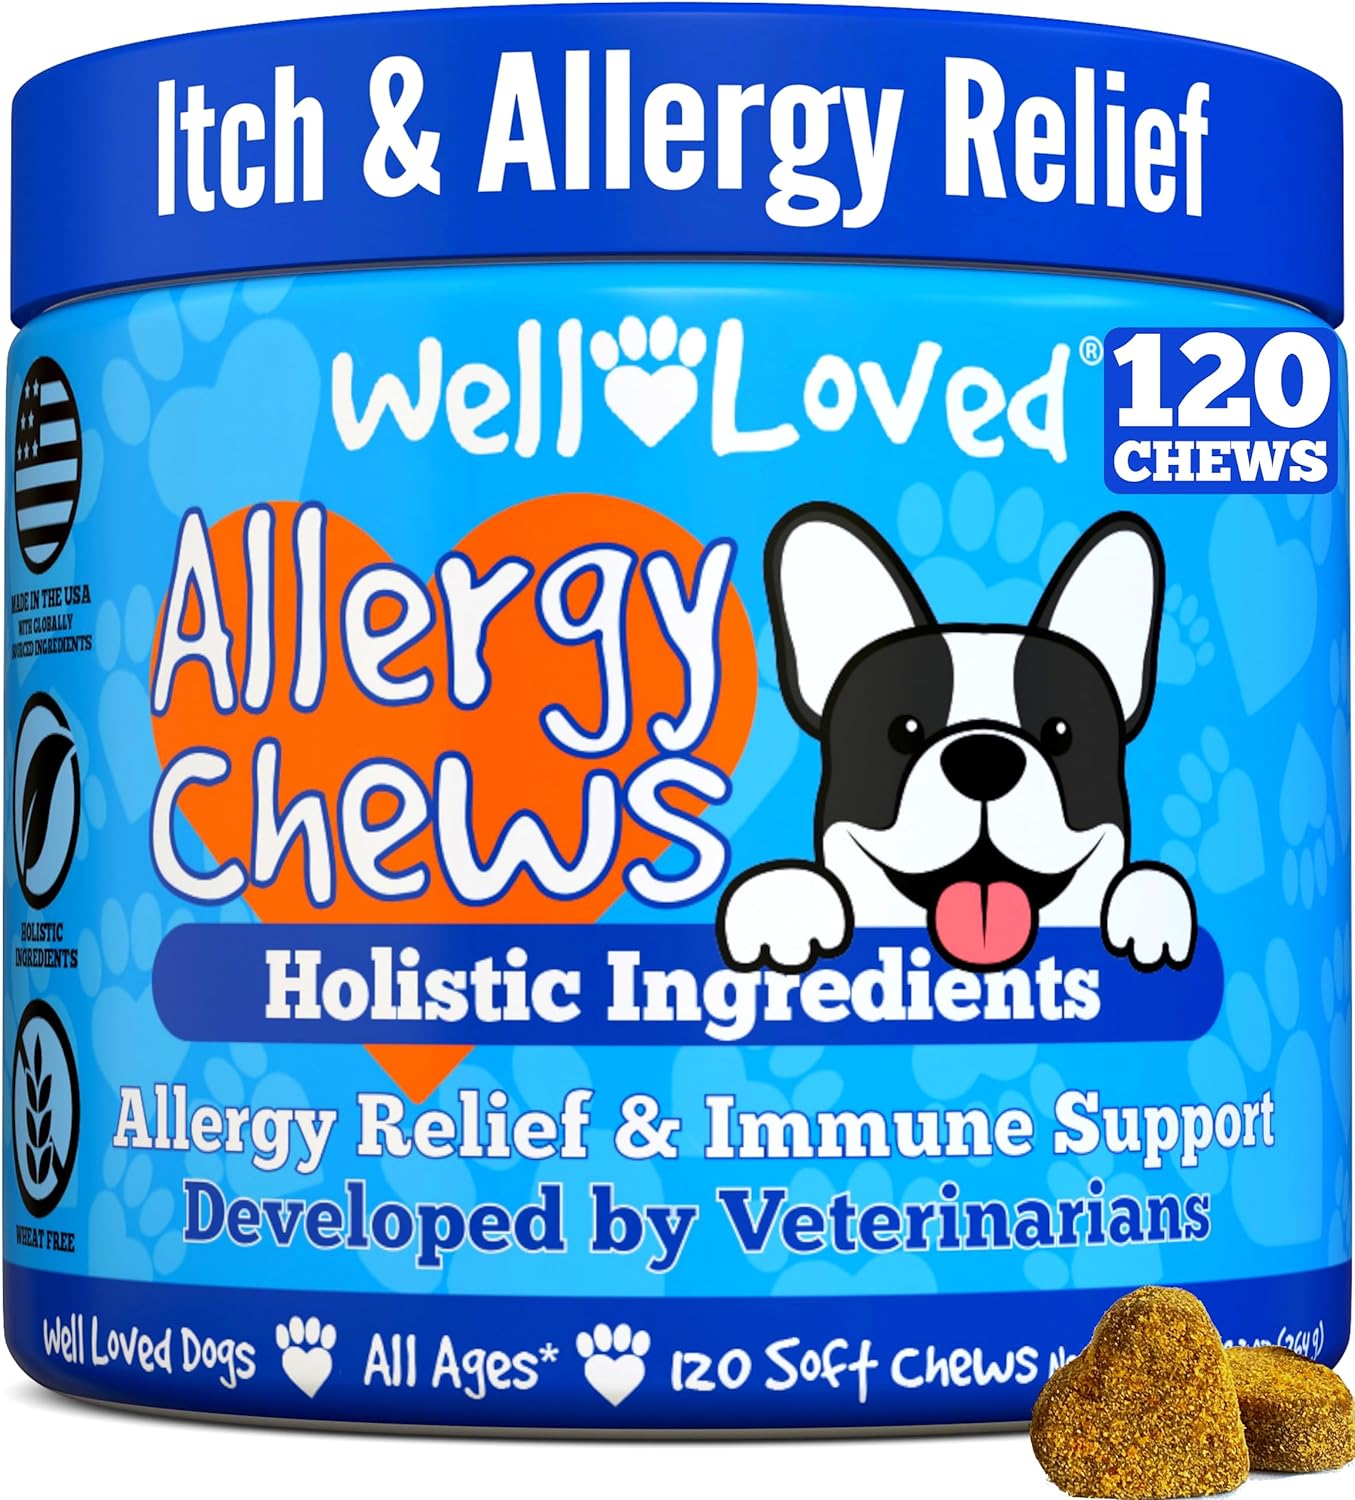 Dog Allergy Chews - Dog Allergy Relief, Made in USA, Vet Developed, Hot Spot Treatment for Dogs, Dog Itch Relief, Anti Itch for Dogs, Dog Vitamins, Dog Skin Allergies Treatment, 120 Count